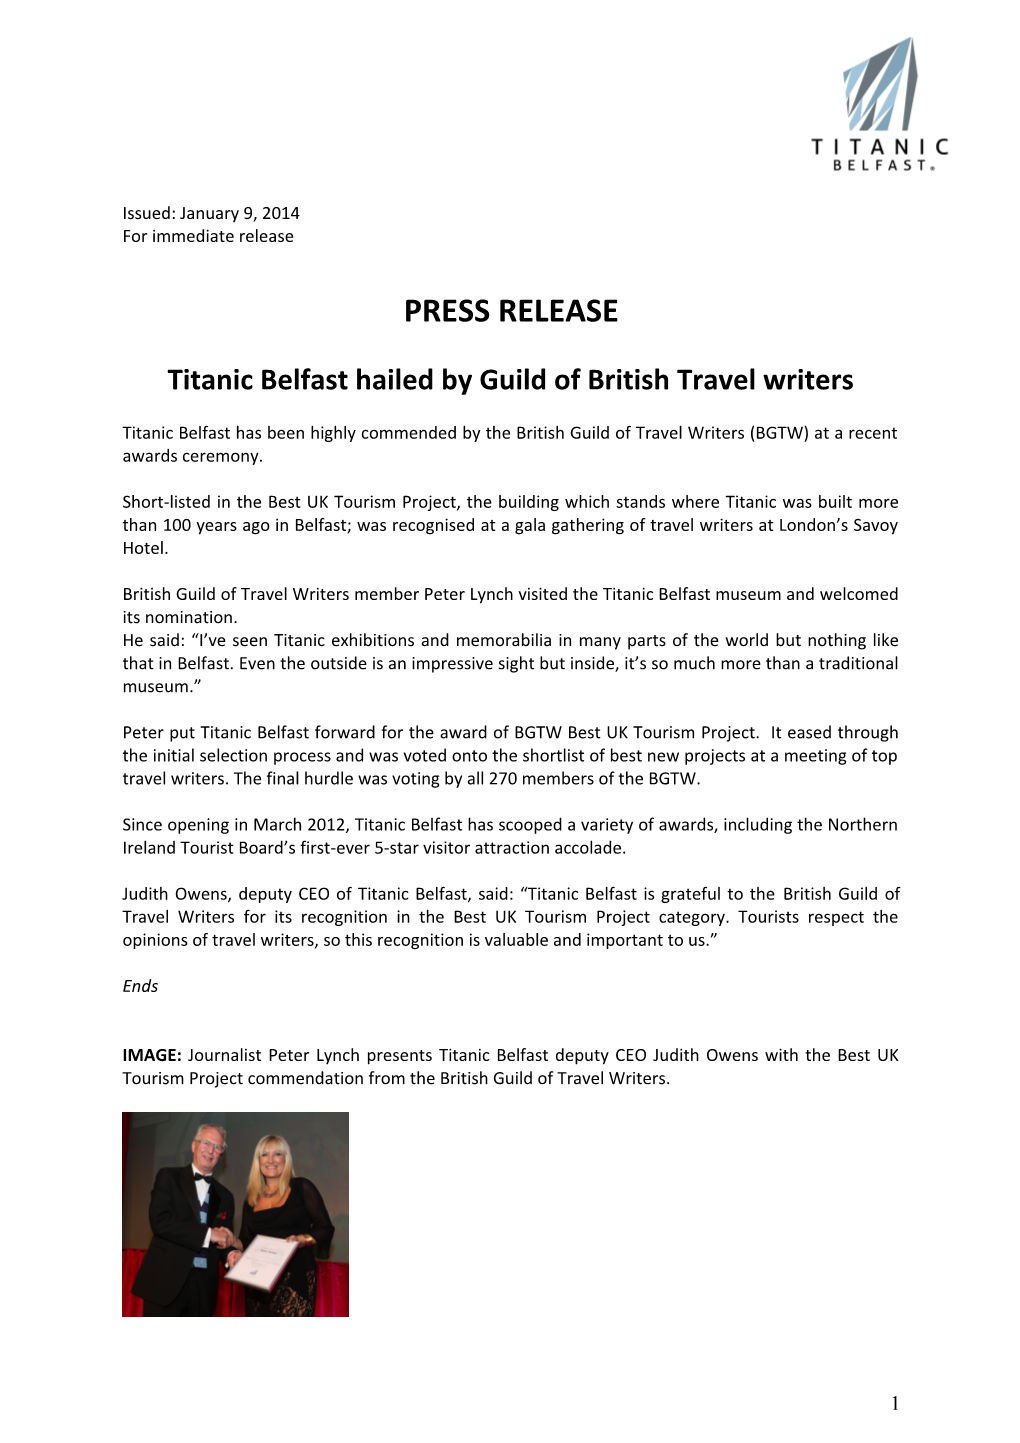 Titanic Belfast Hailed by Guild of British Travel Writers